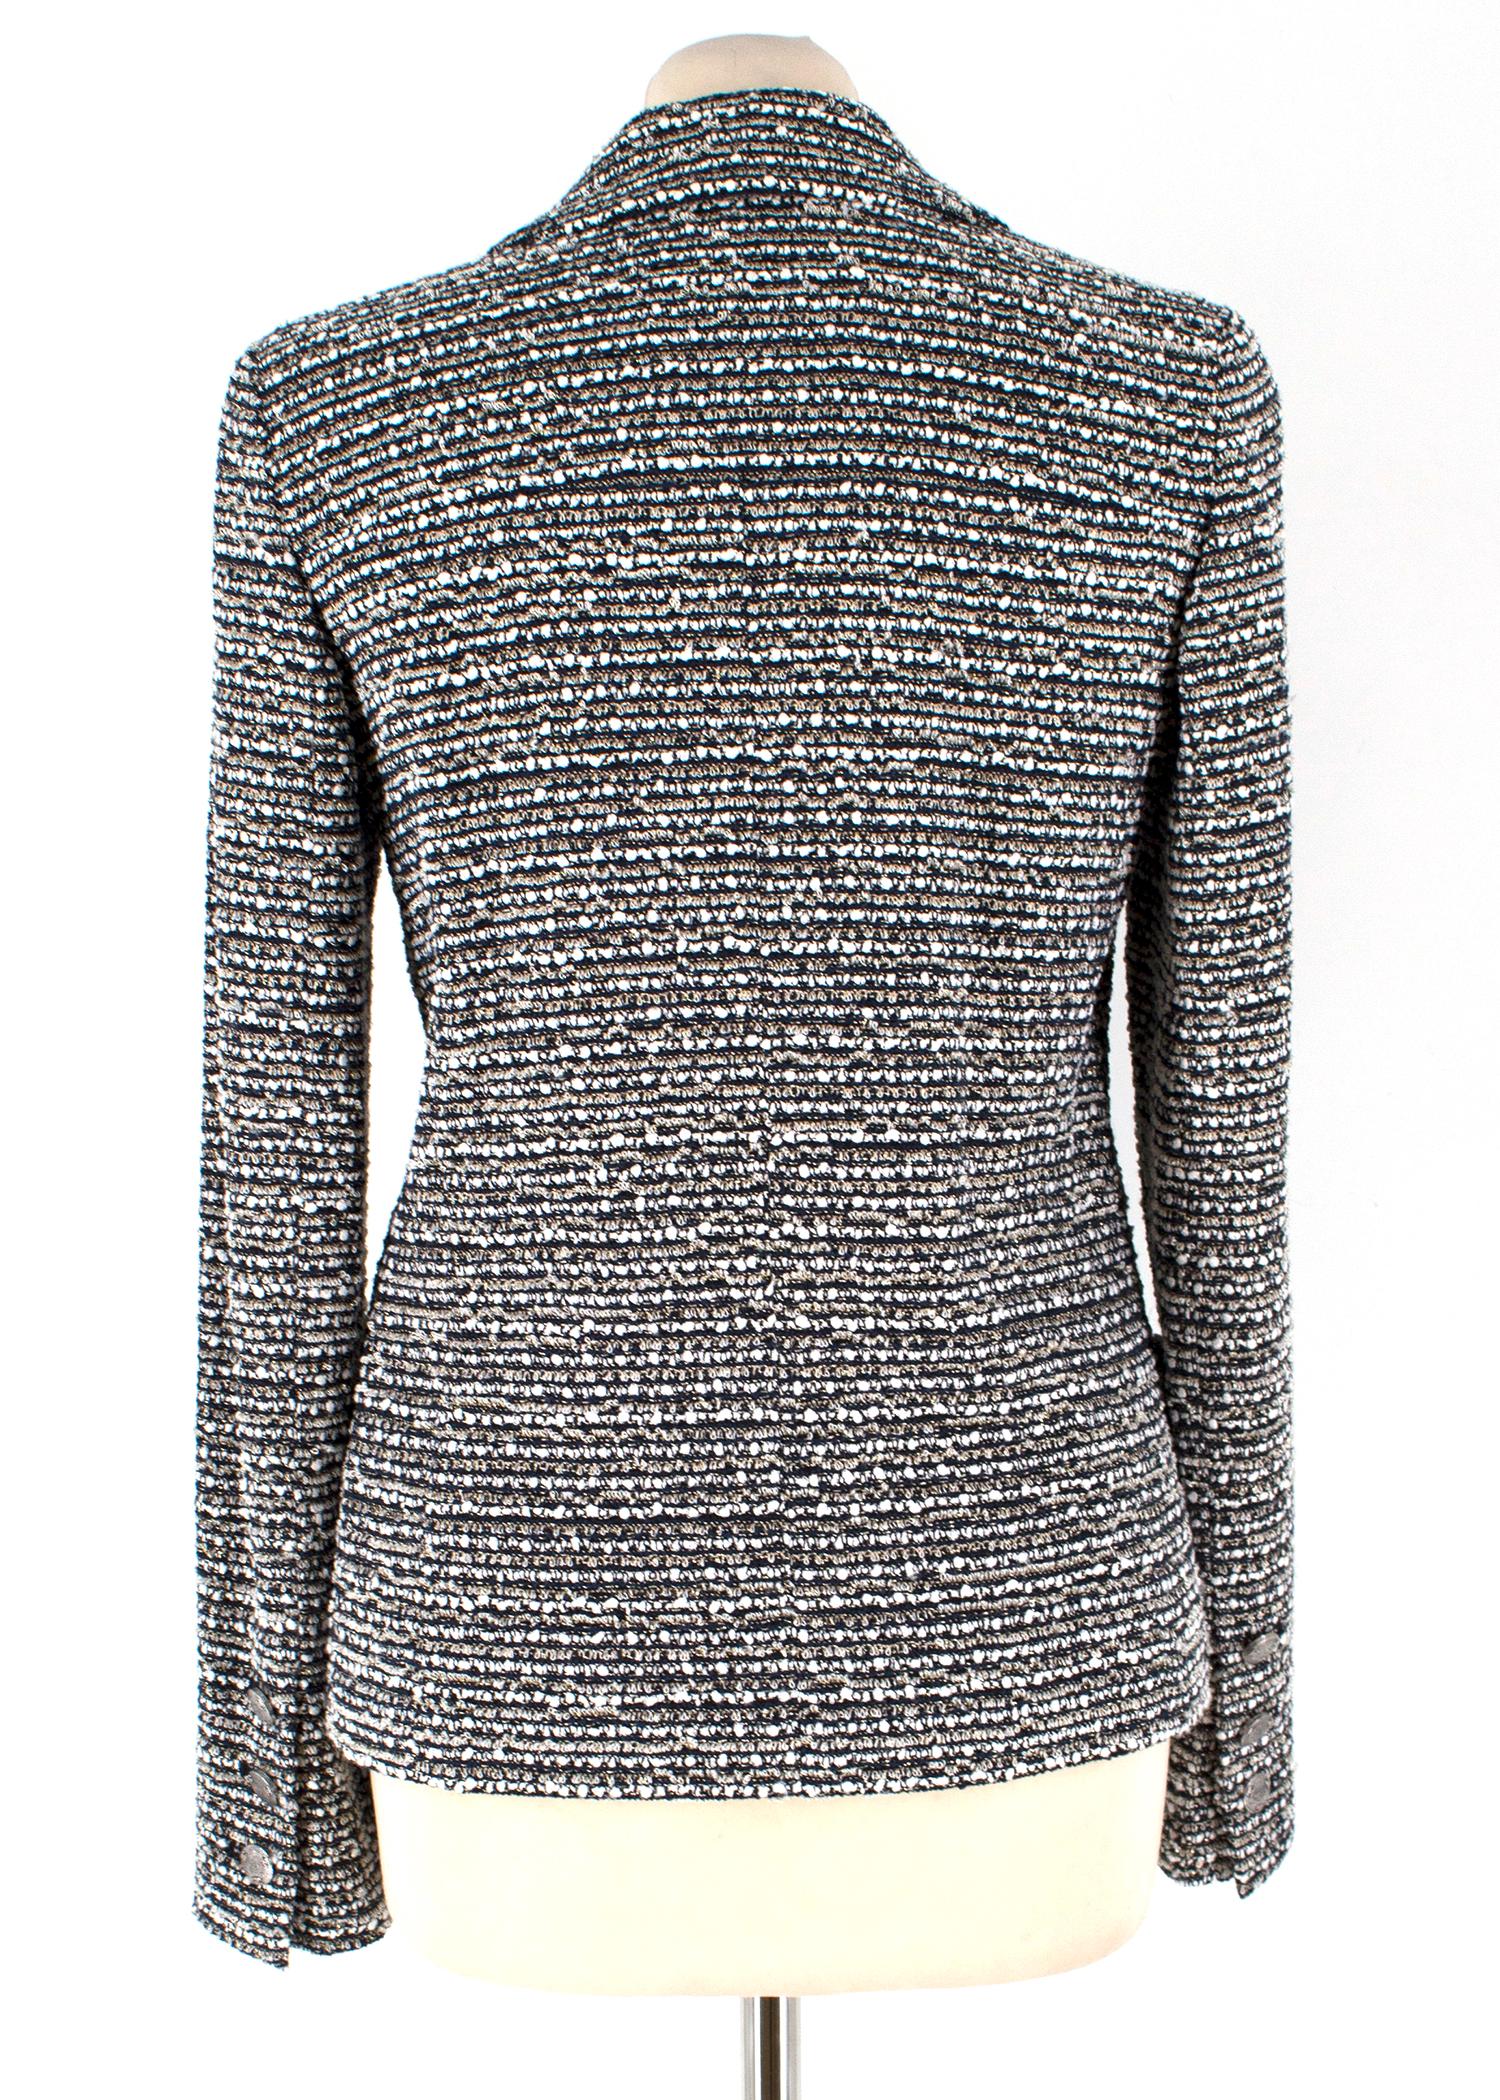 Chanel Black and White Tweed Jacket - Size US 0-2 at 1stDibs | chanel ...